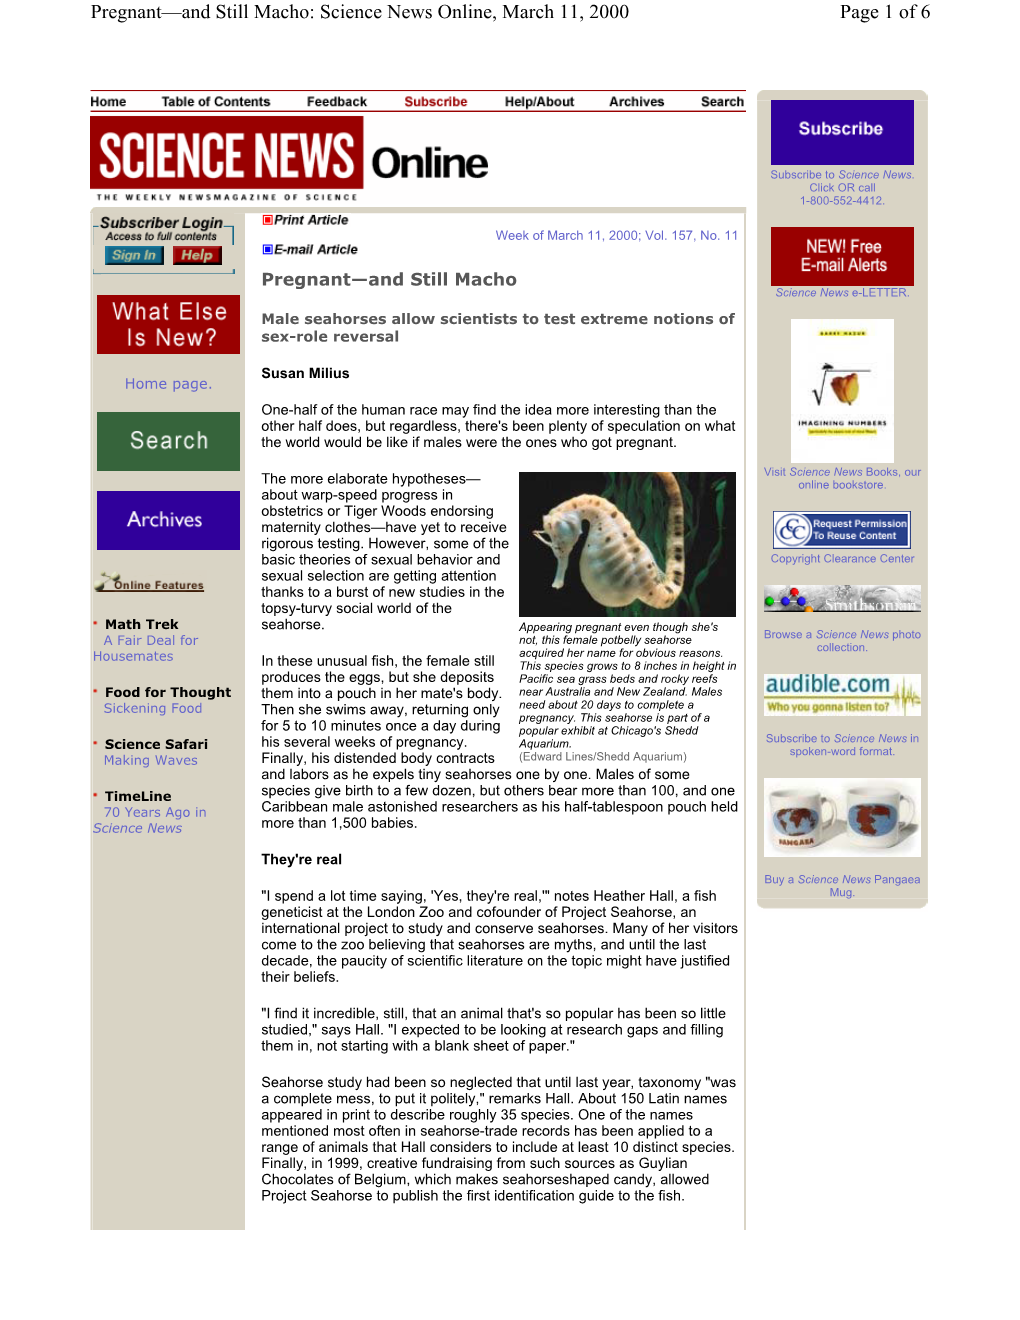 Page 1 of 6 Pregnant—And Still Macho: Science News Online